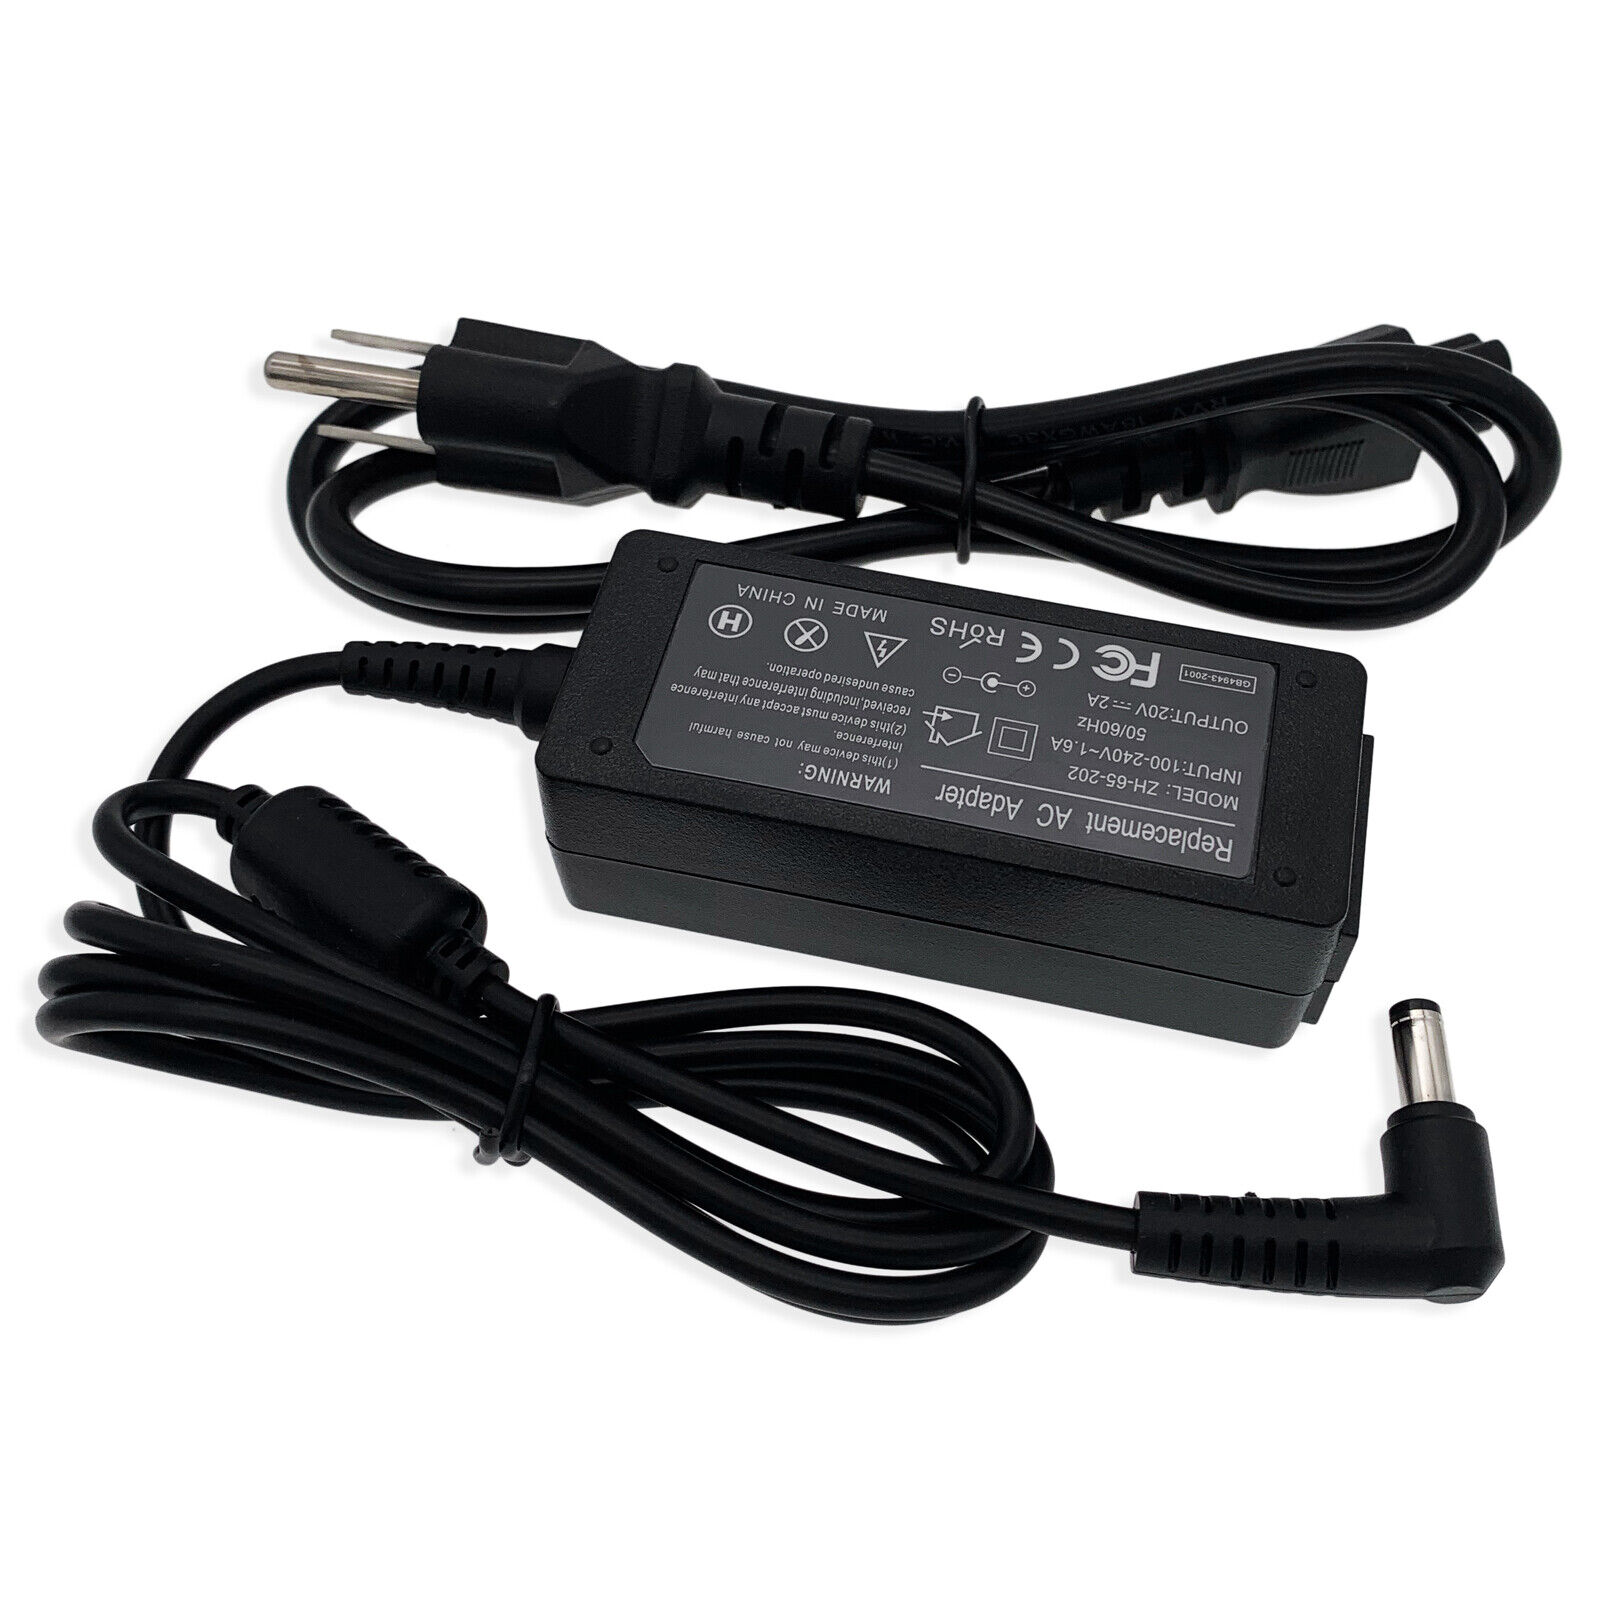 20V 2A New Laptop AC Power Adapter Charger FOR LG X110 X110-G X120 X130 NetBook Bundled Items Power Cable Color Black C